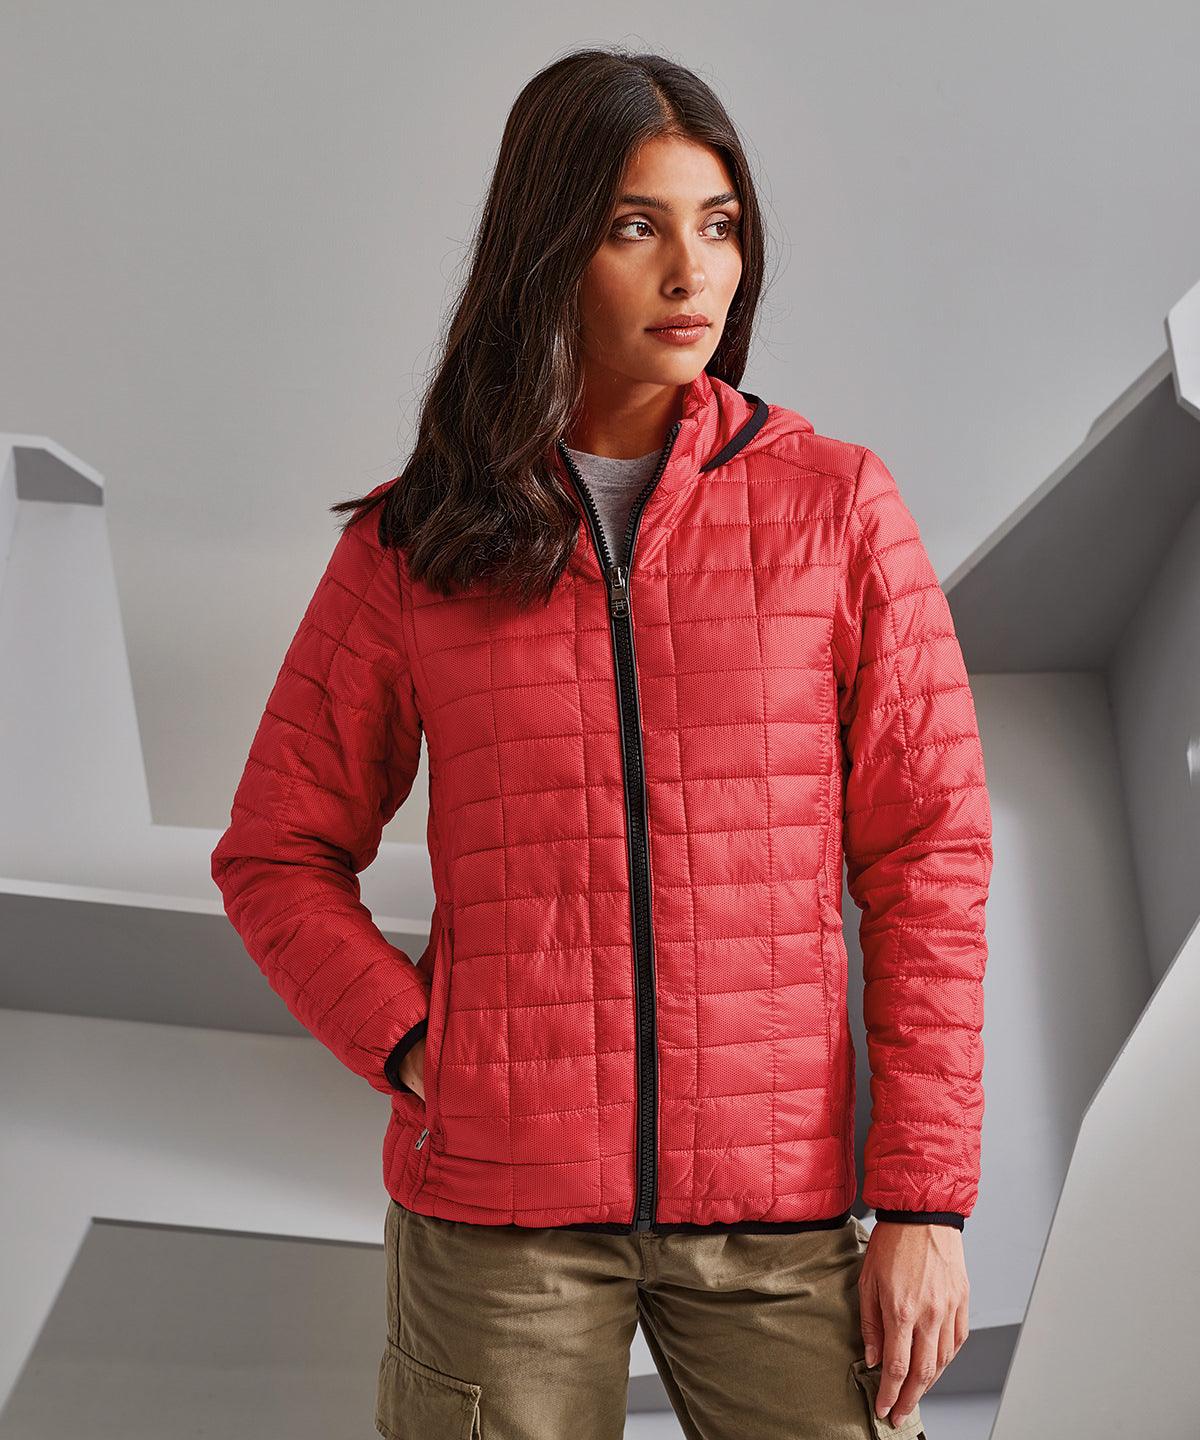 Red - Women's honeycomb hooded jacket Jackets 2786 Jackets & Coats, Padded & Insulation, Padded Perfection, Rebrandable, Women's Fashion Schoolwear Centres